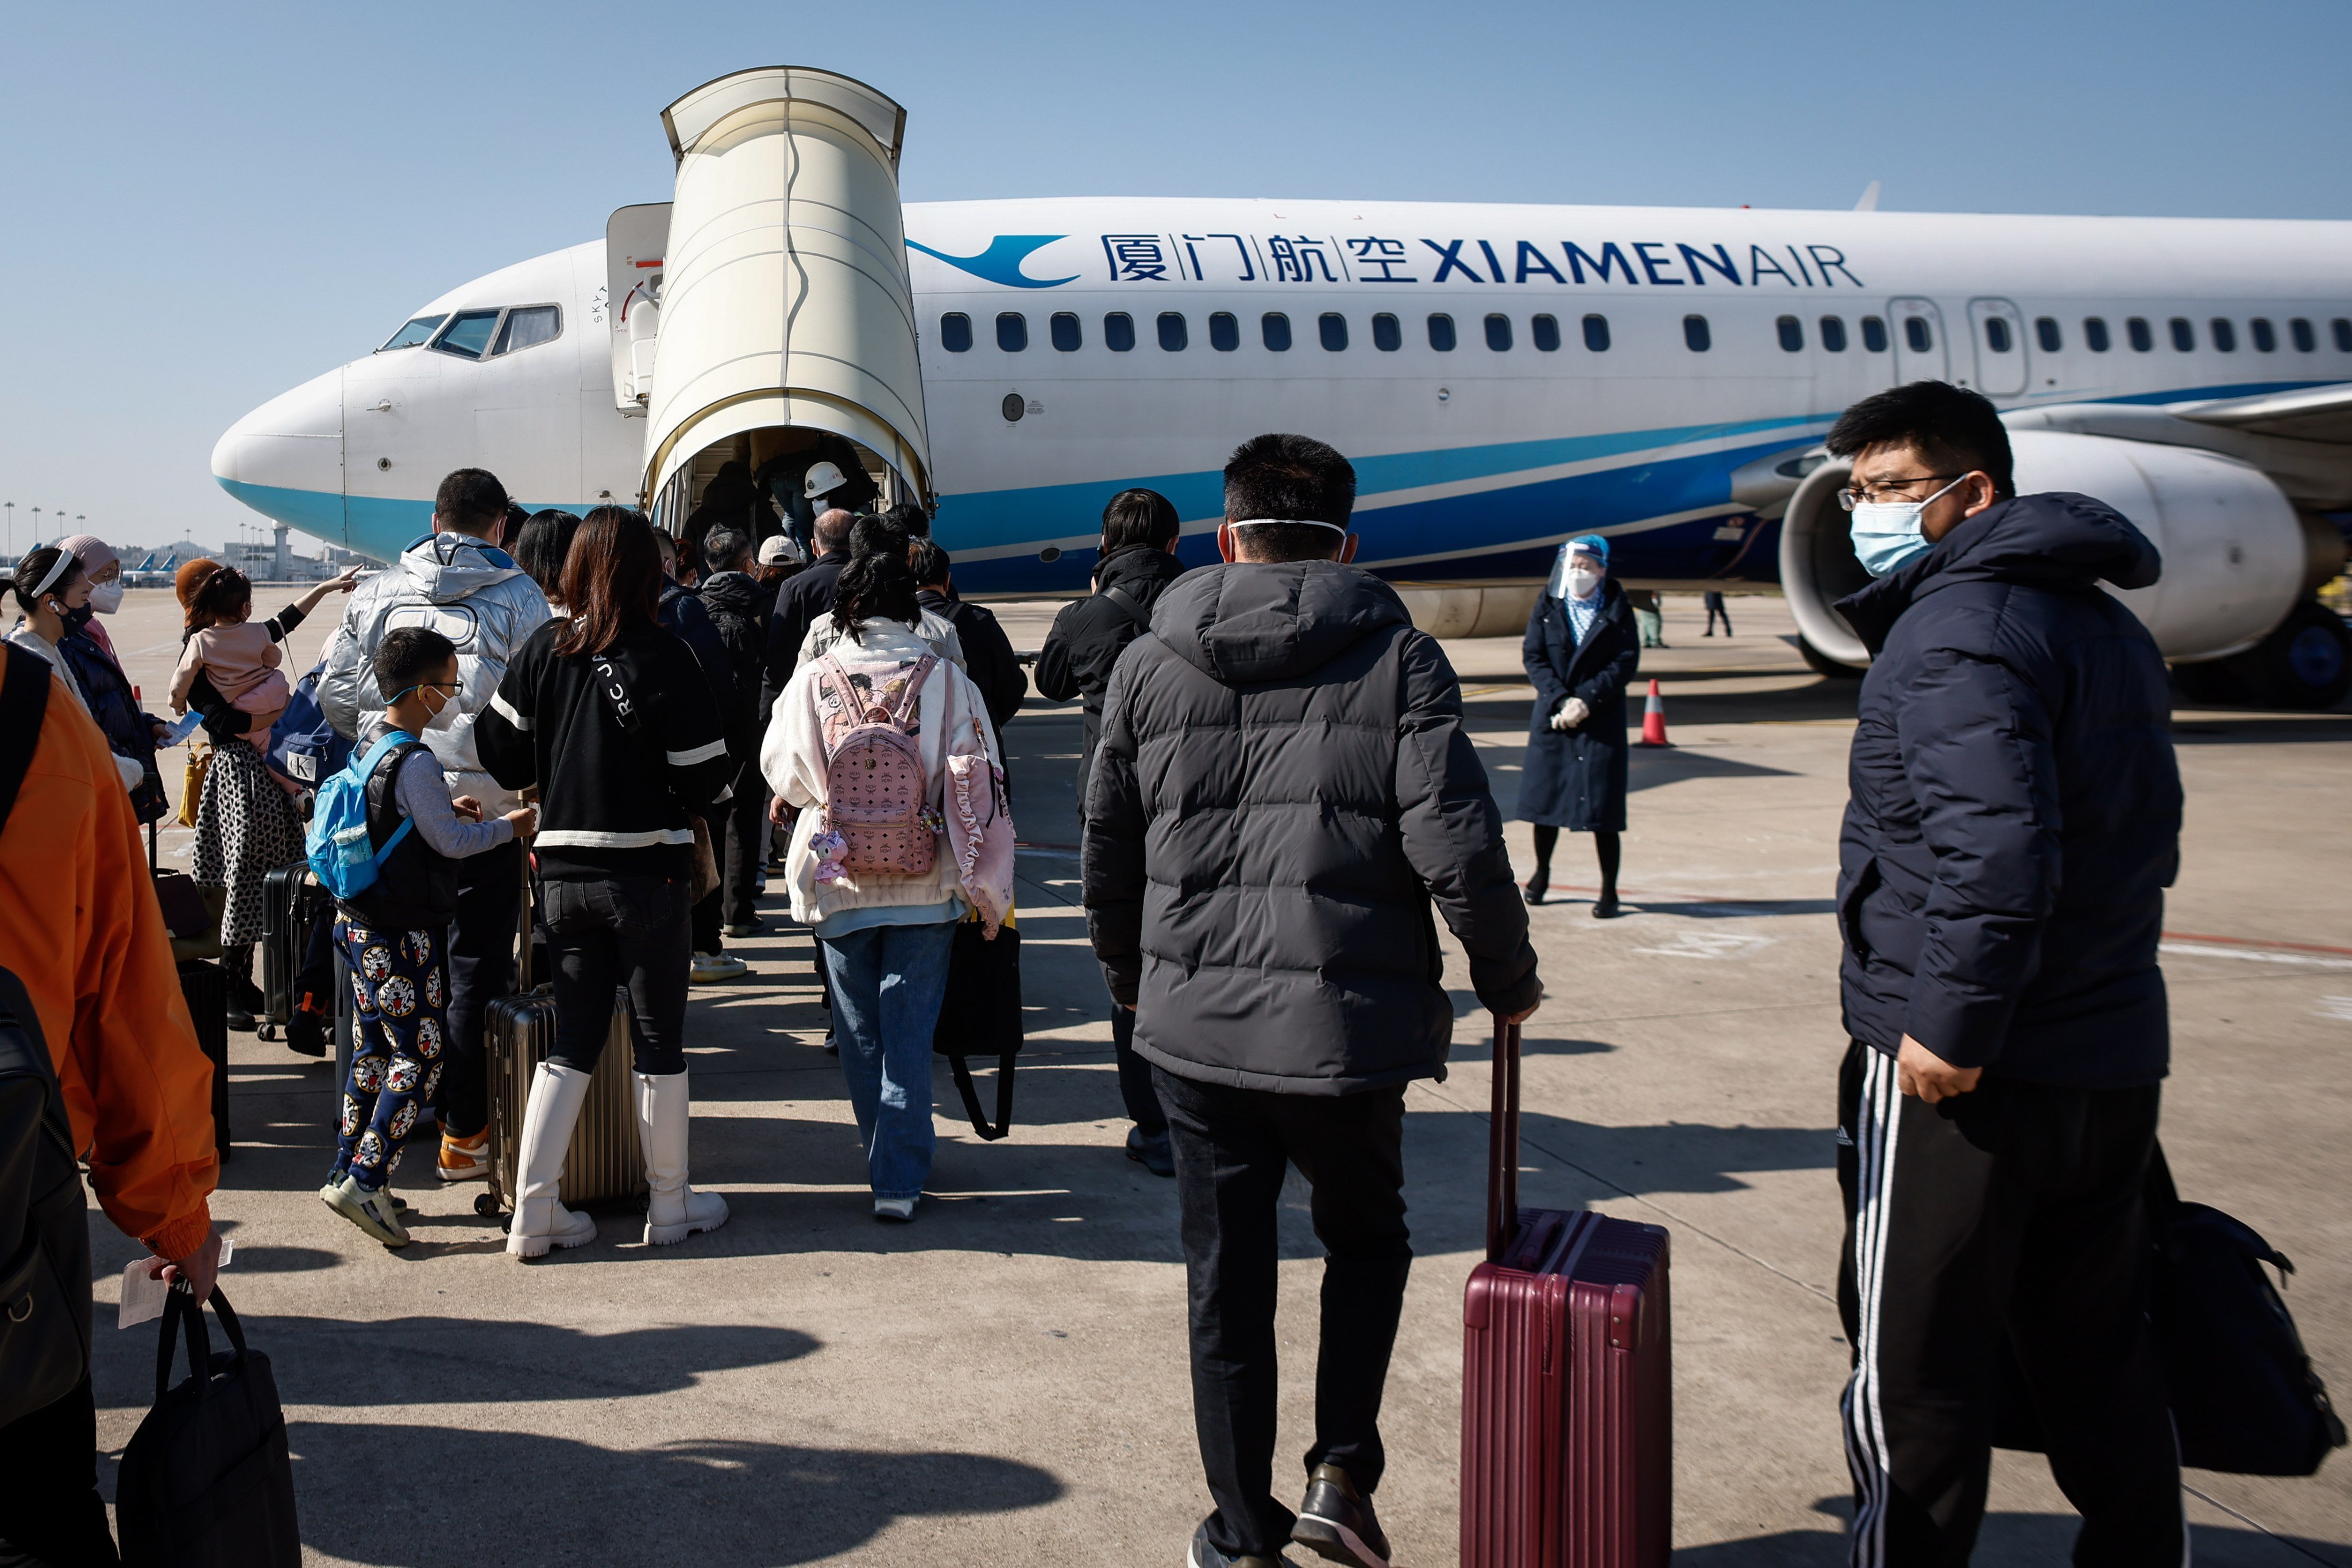 Flight bookings in a number of Chinese cities this month have exceeded what were seen in the same period in 2019. Photo: EPA-EFE